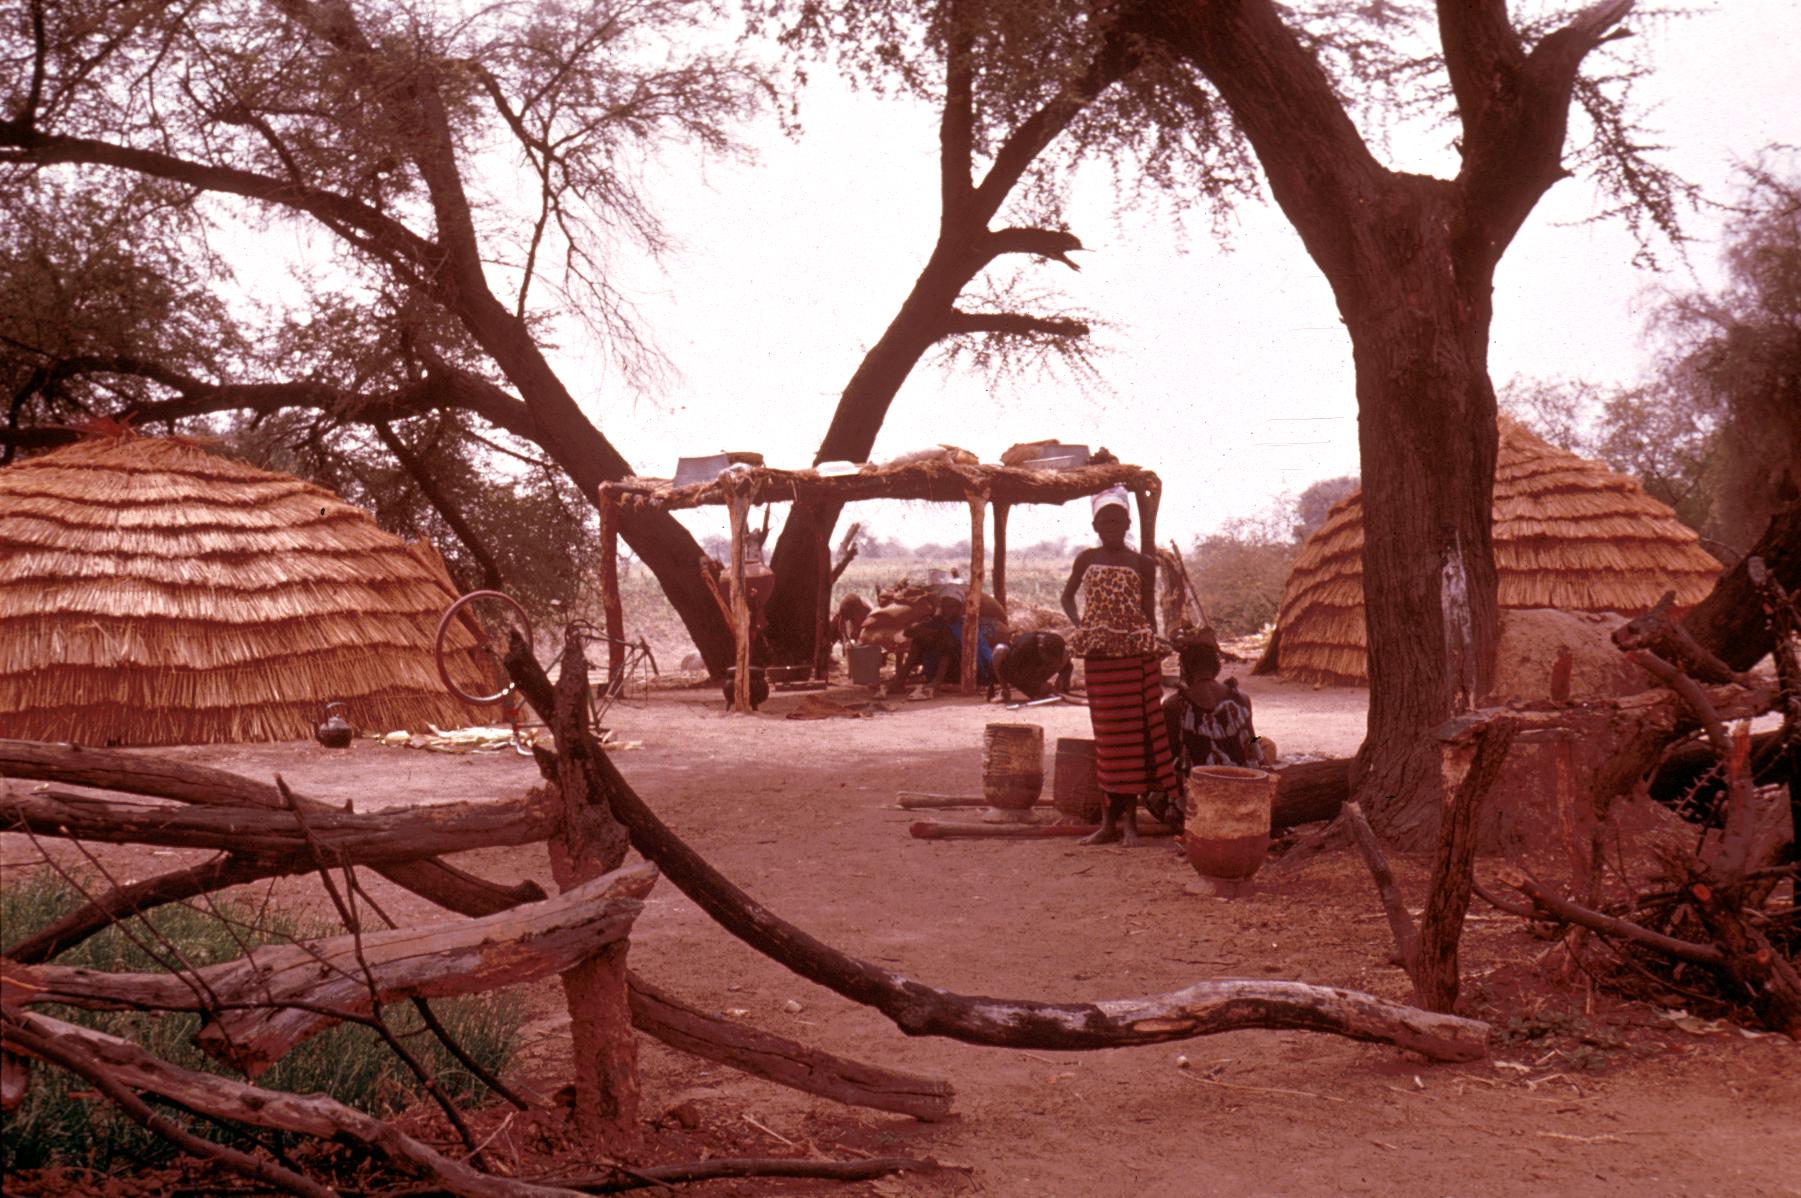 Temporary Encampment of Fulbe Near the River